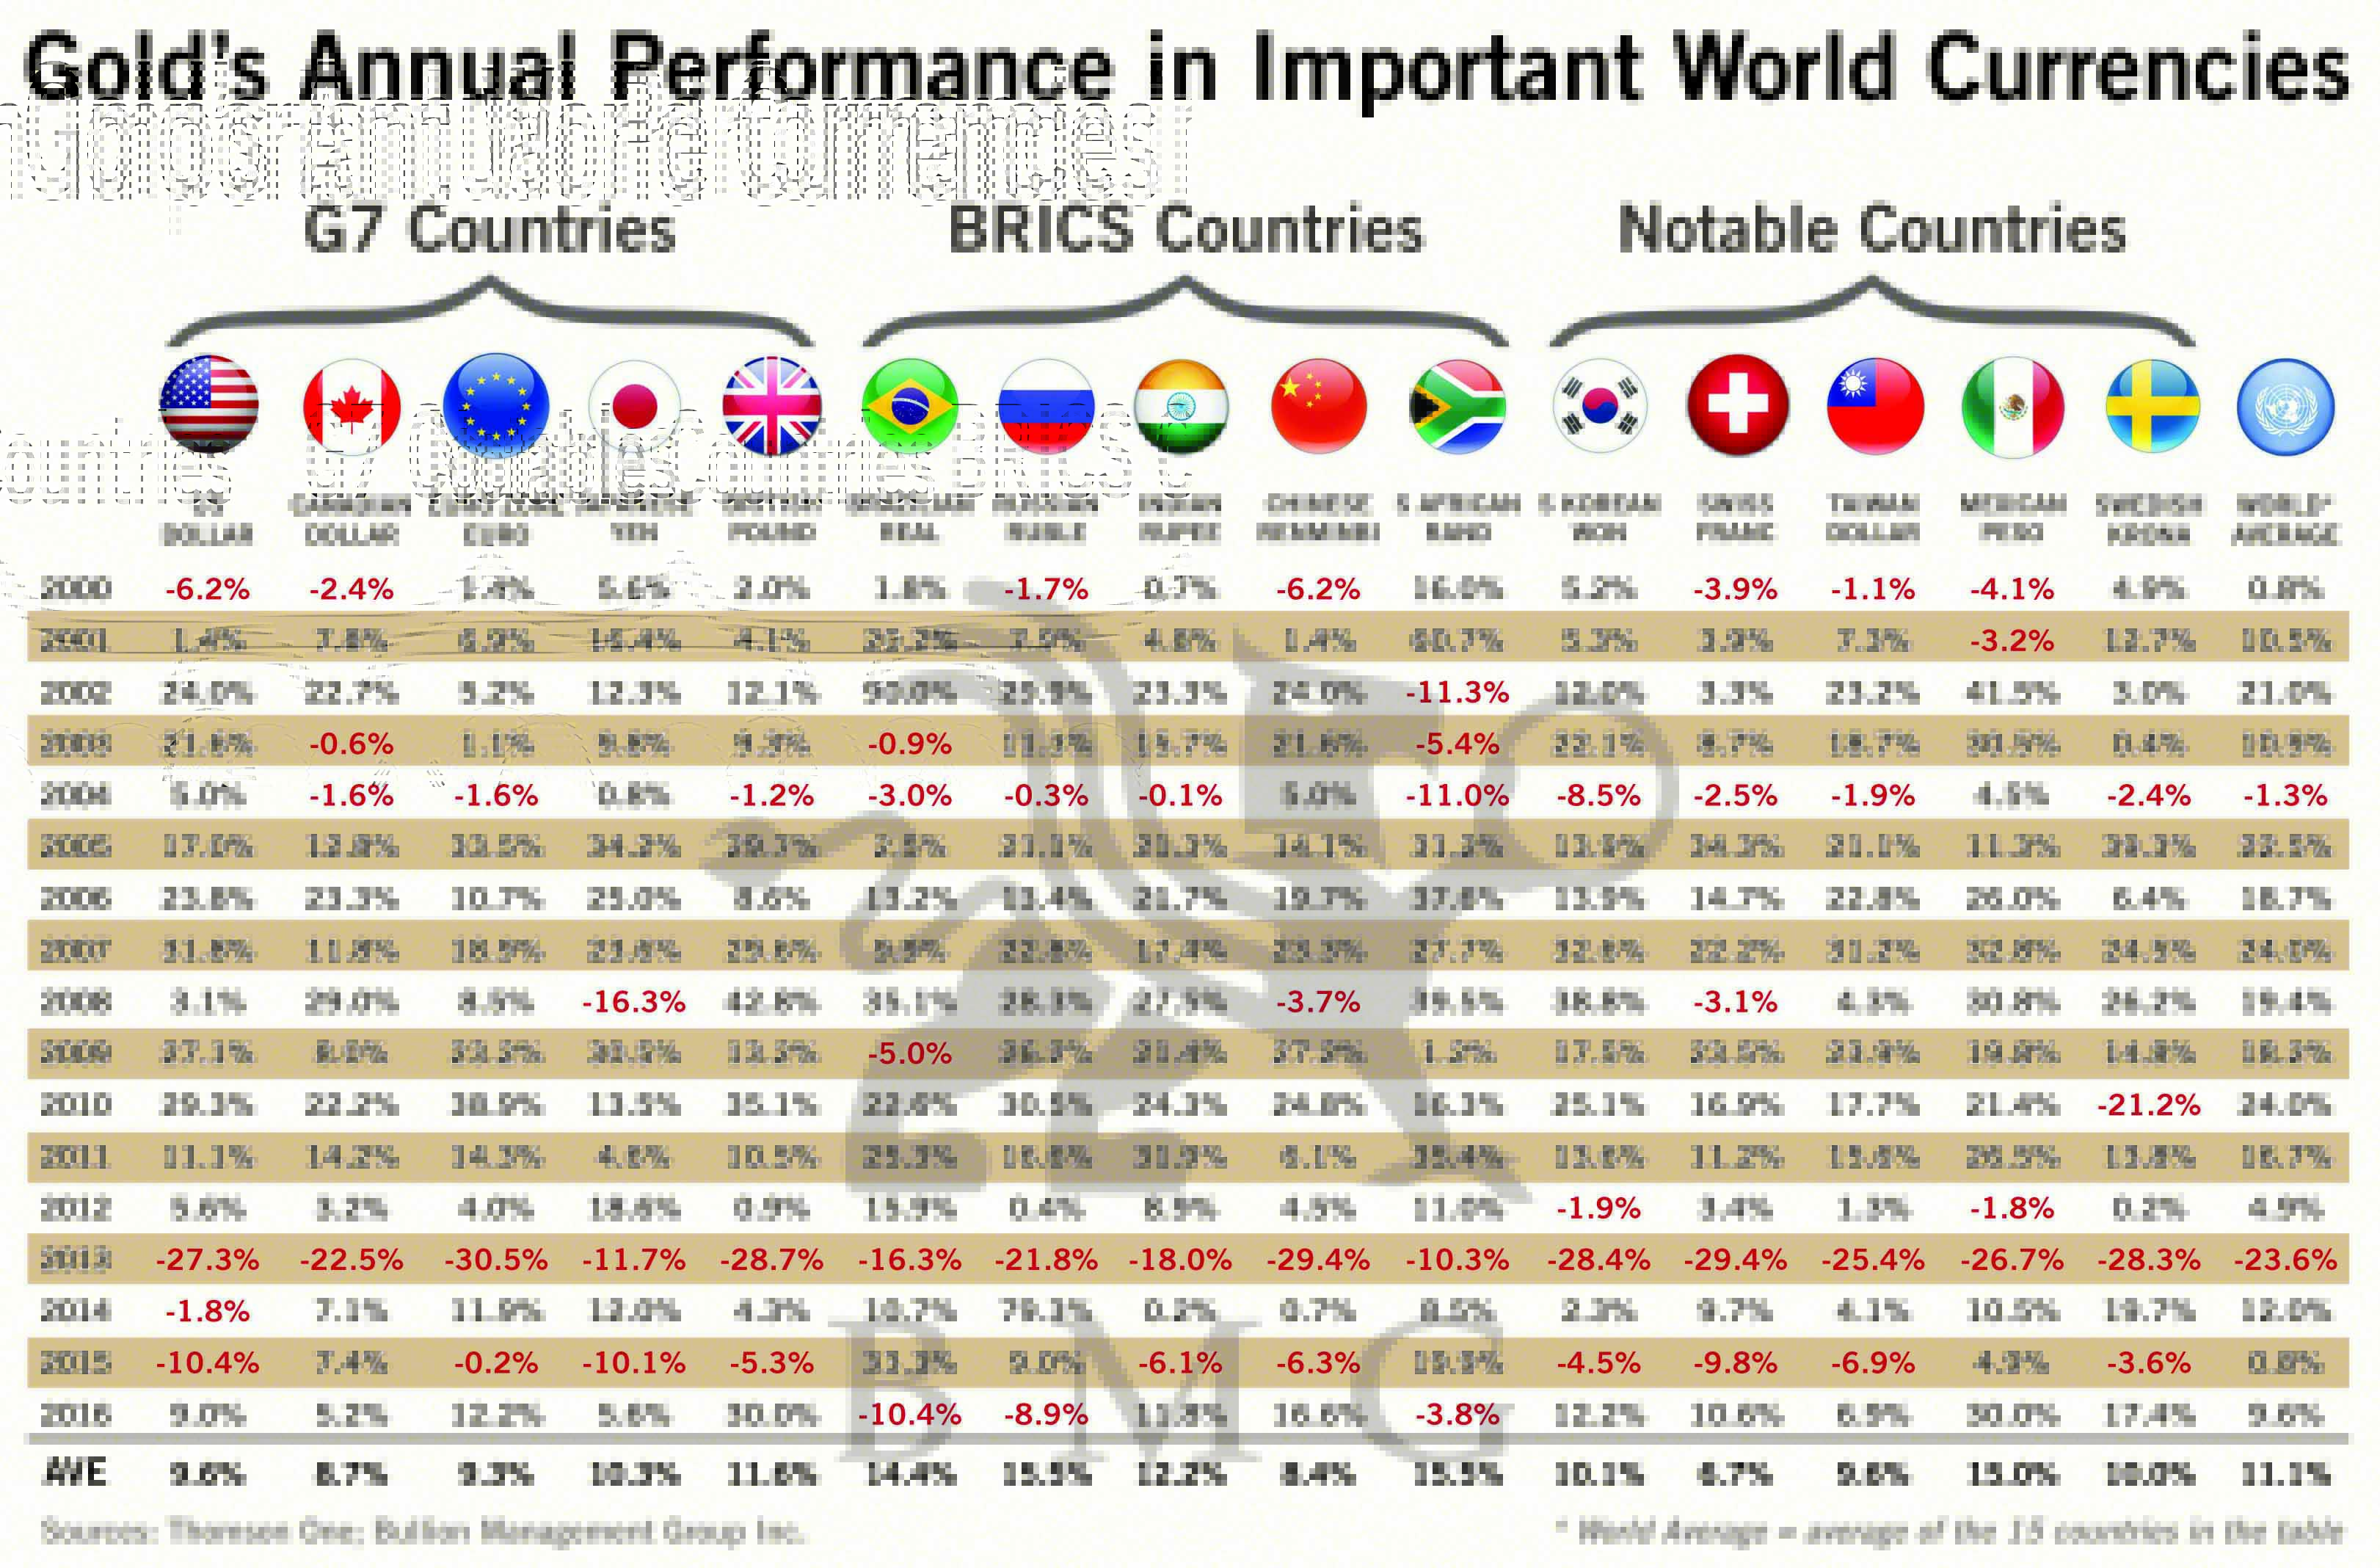 Gold's Annual Performance in Important World Currencies BMG